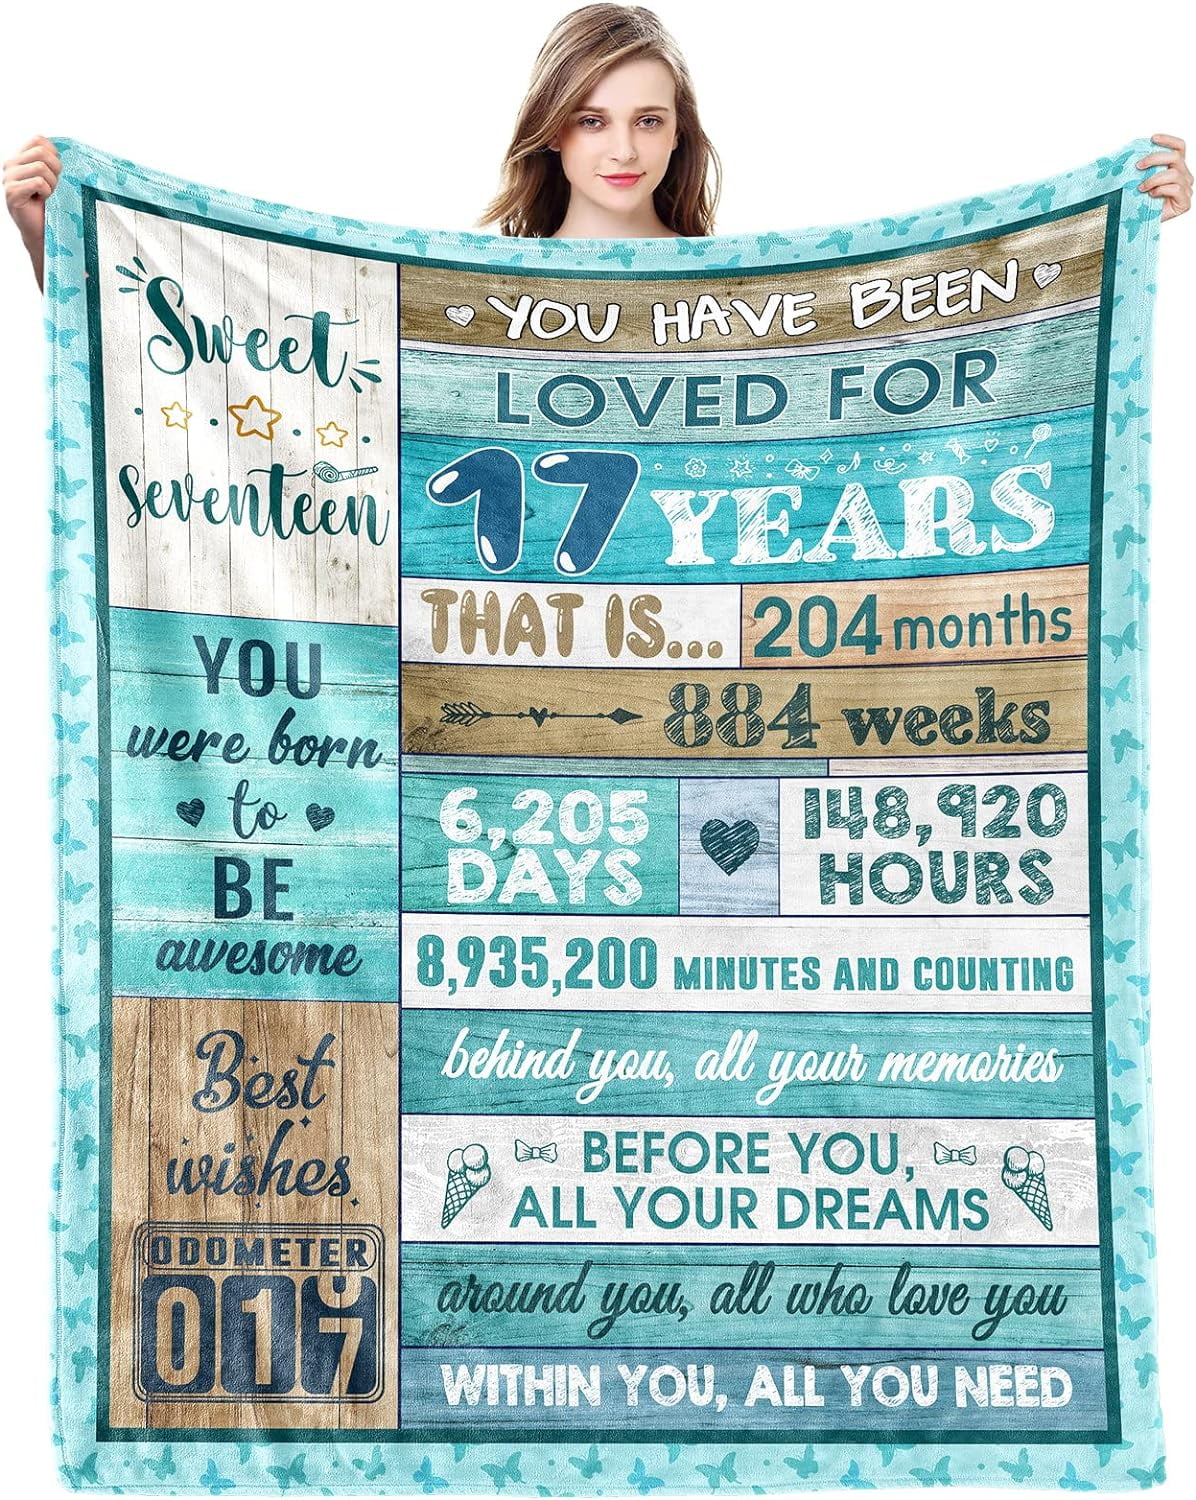 17 Year Old Girl Gift for Birthday Throw Blanket 60x50, Gifts for 17 Year  Old Girls, 17th Birthday Gifts for Girls, 17 Year Old Girl Gifts Ideas